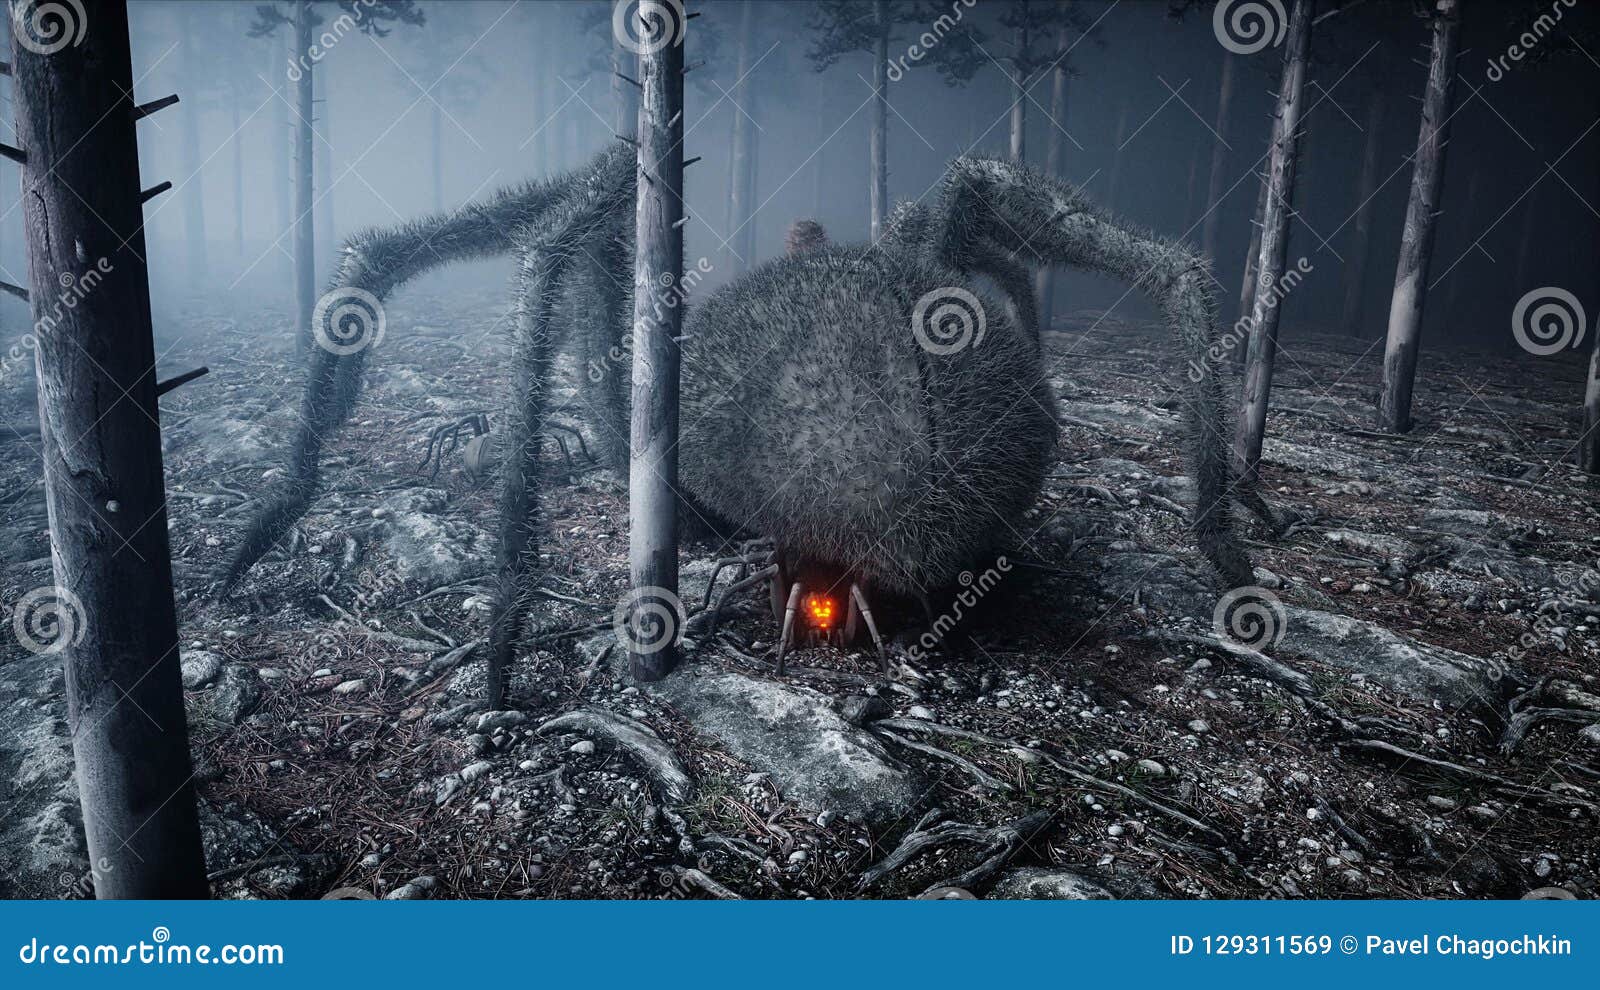 scary gigant spider in fog night forest. fear and horror. mistic and halloween concept. 3d rendering.